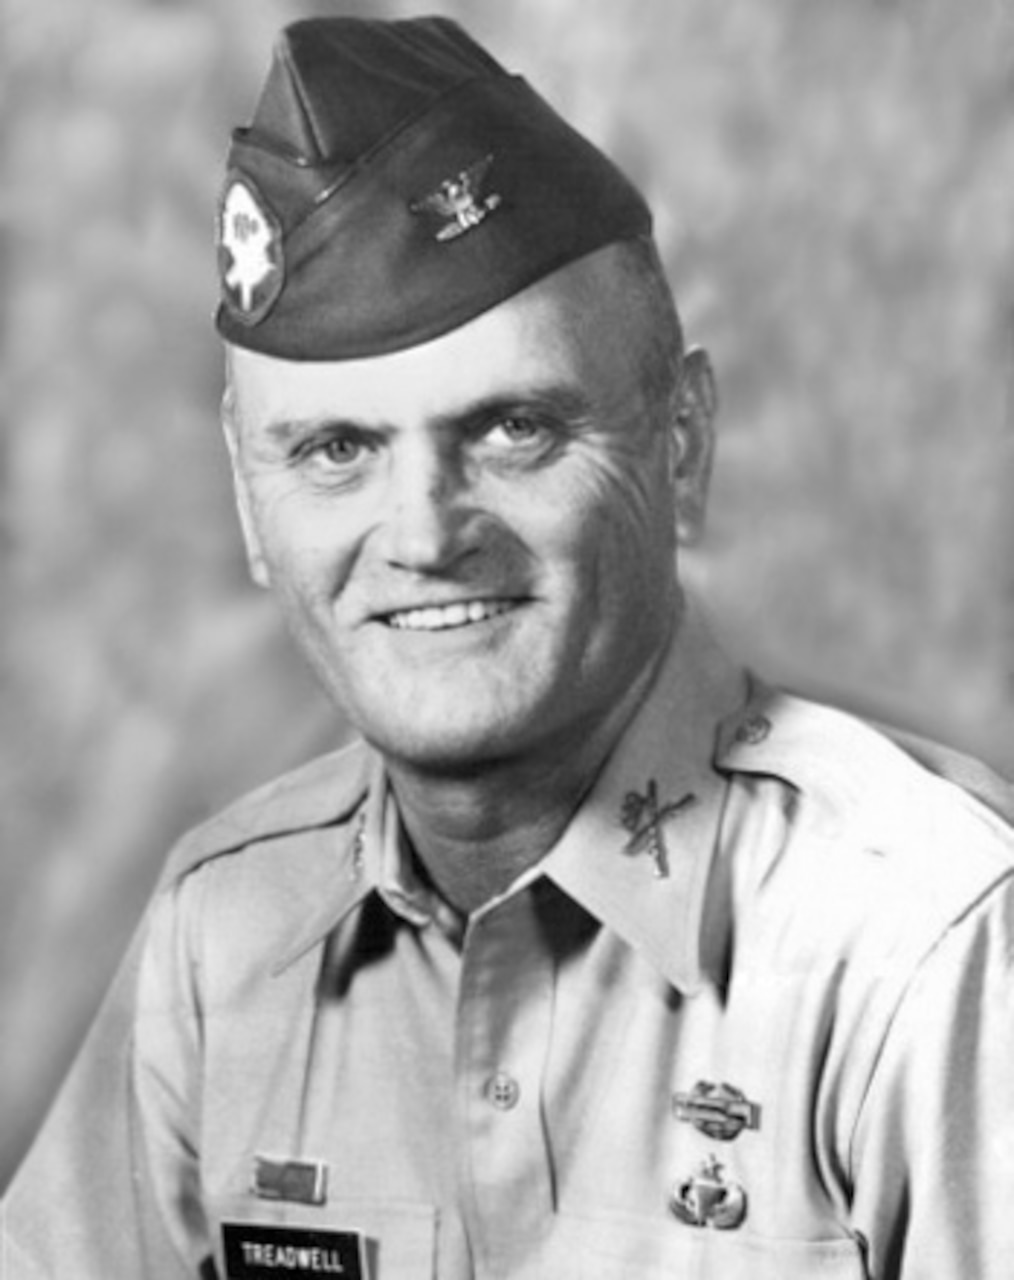 Official photo of a man in his Army dress uniform.